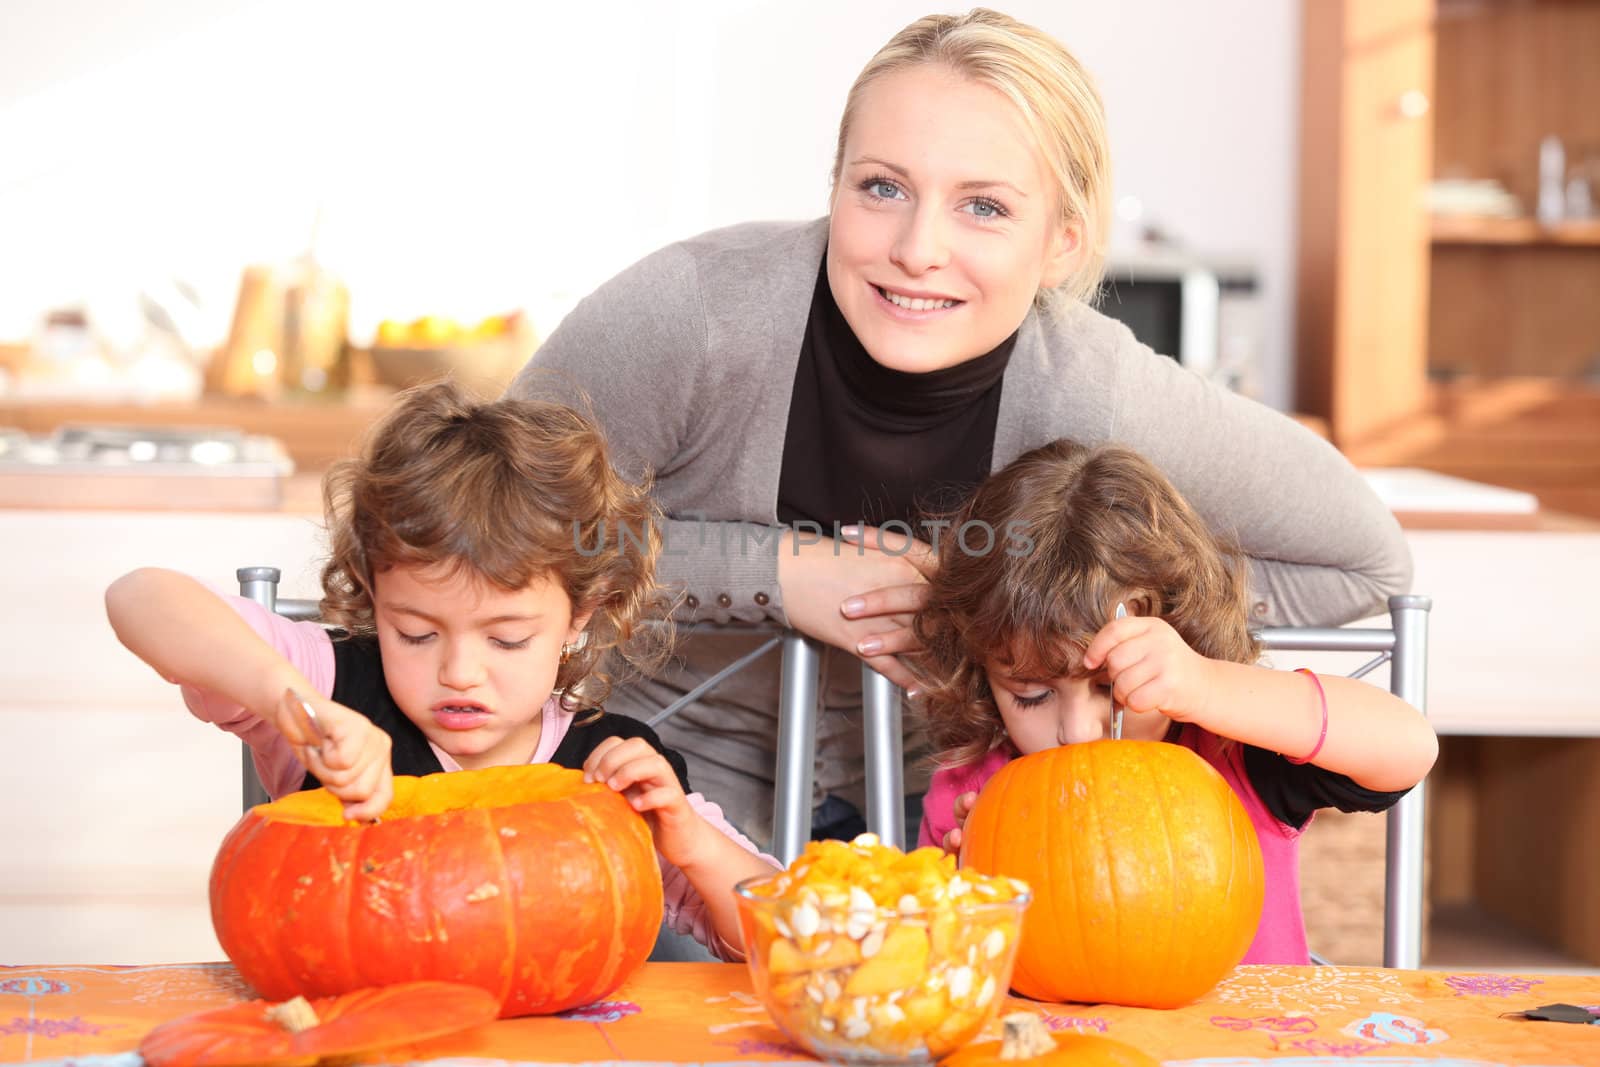 Mother and child preparing pumpkin by phovoir